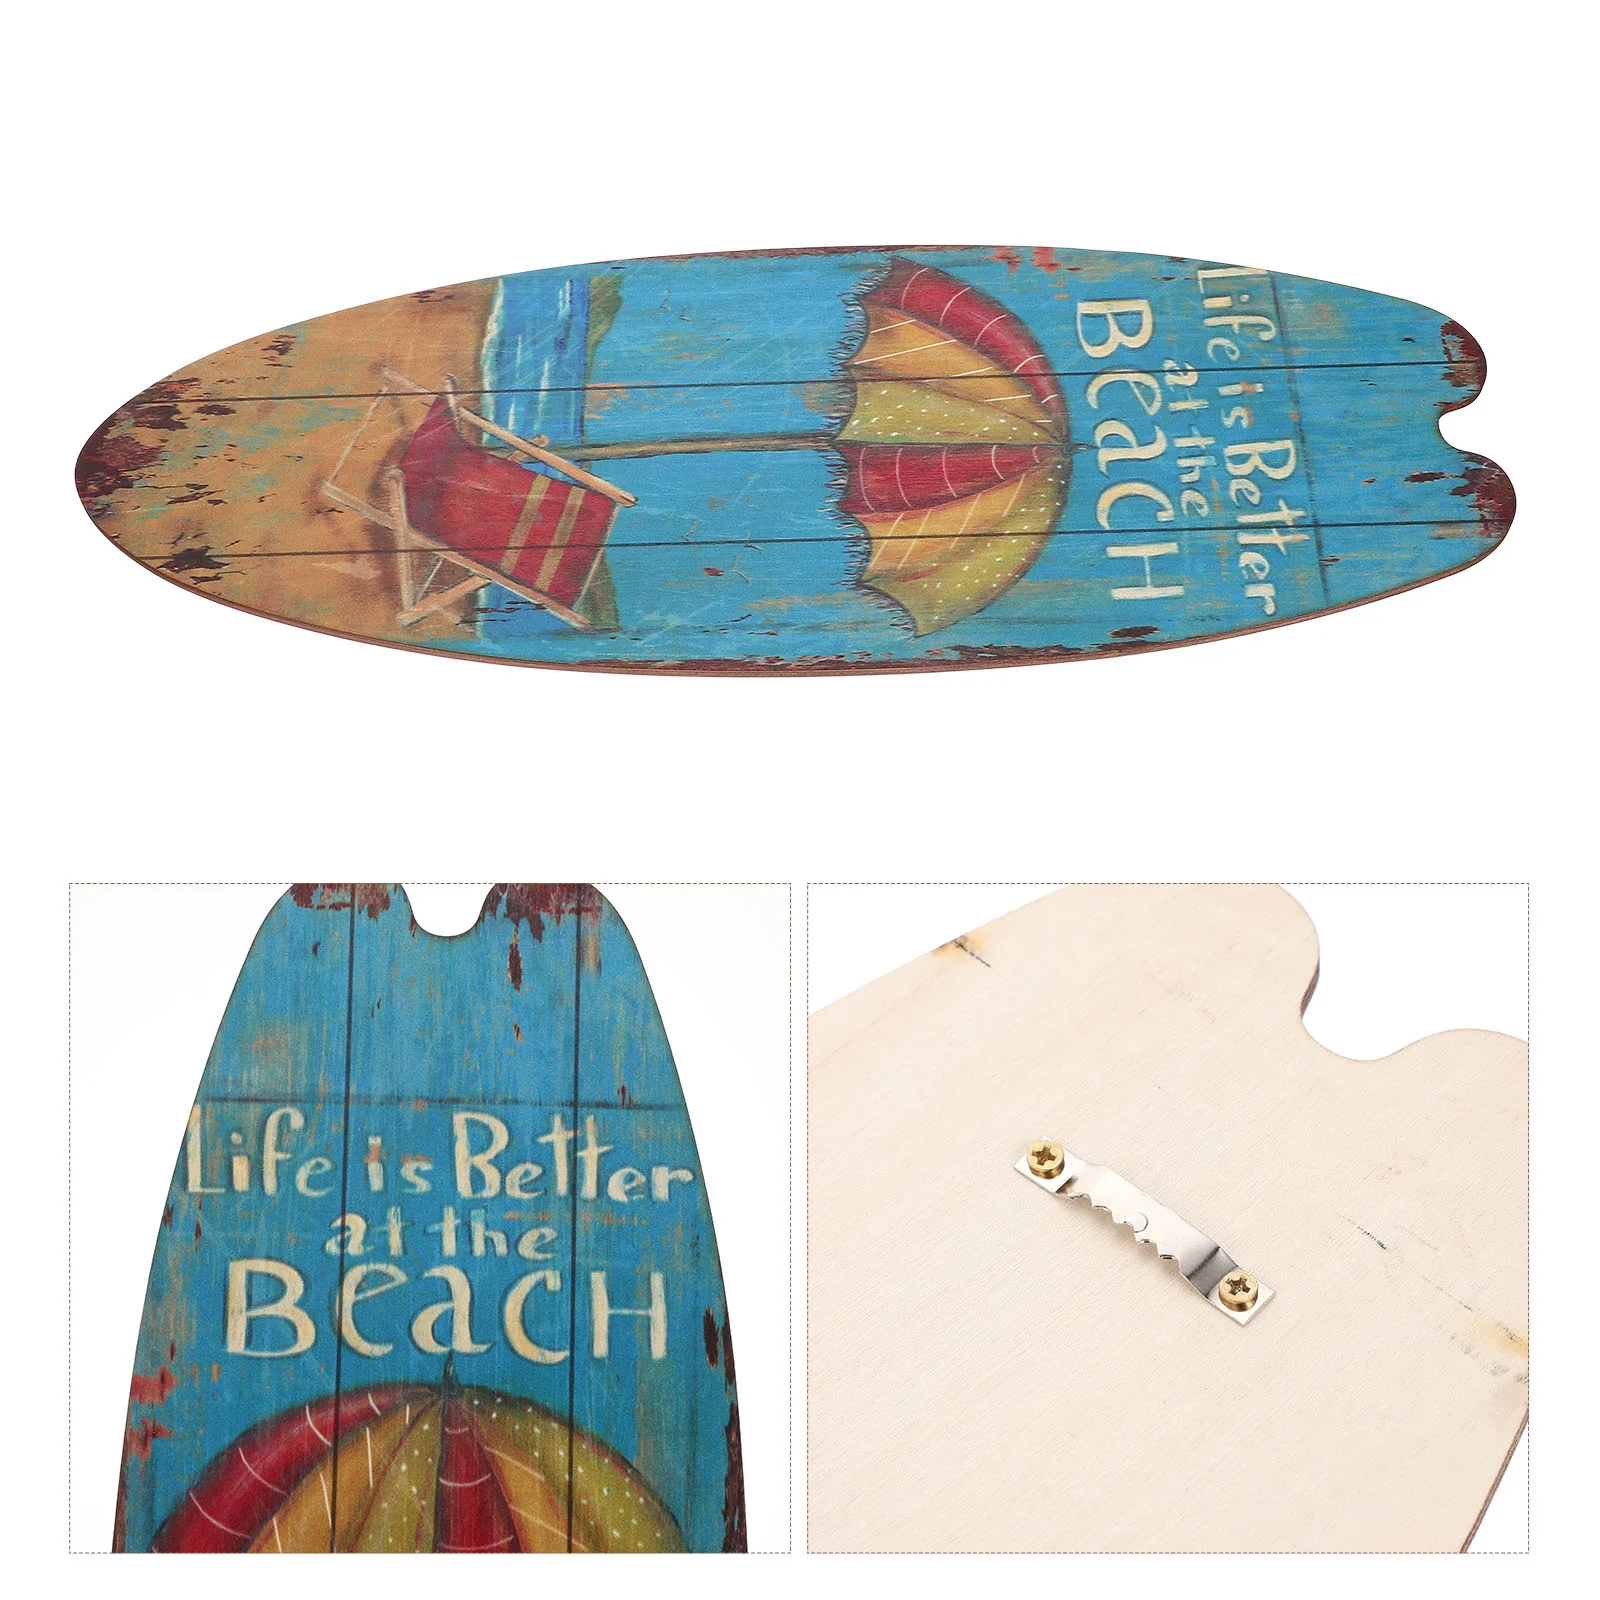 

Surfboard Sign Wall Decor Beach Wooden Hanging Plaque Decoration Wood Signs Summer Surf Board Decorations Coastal Nautical Party